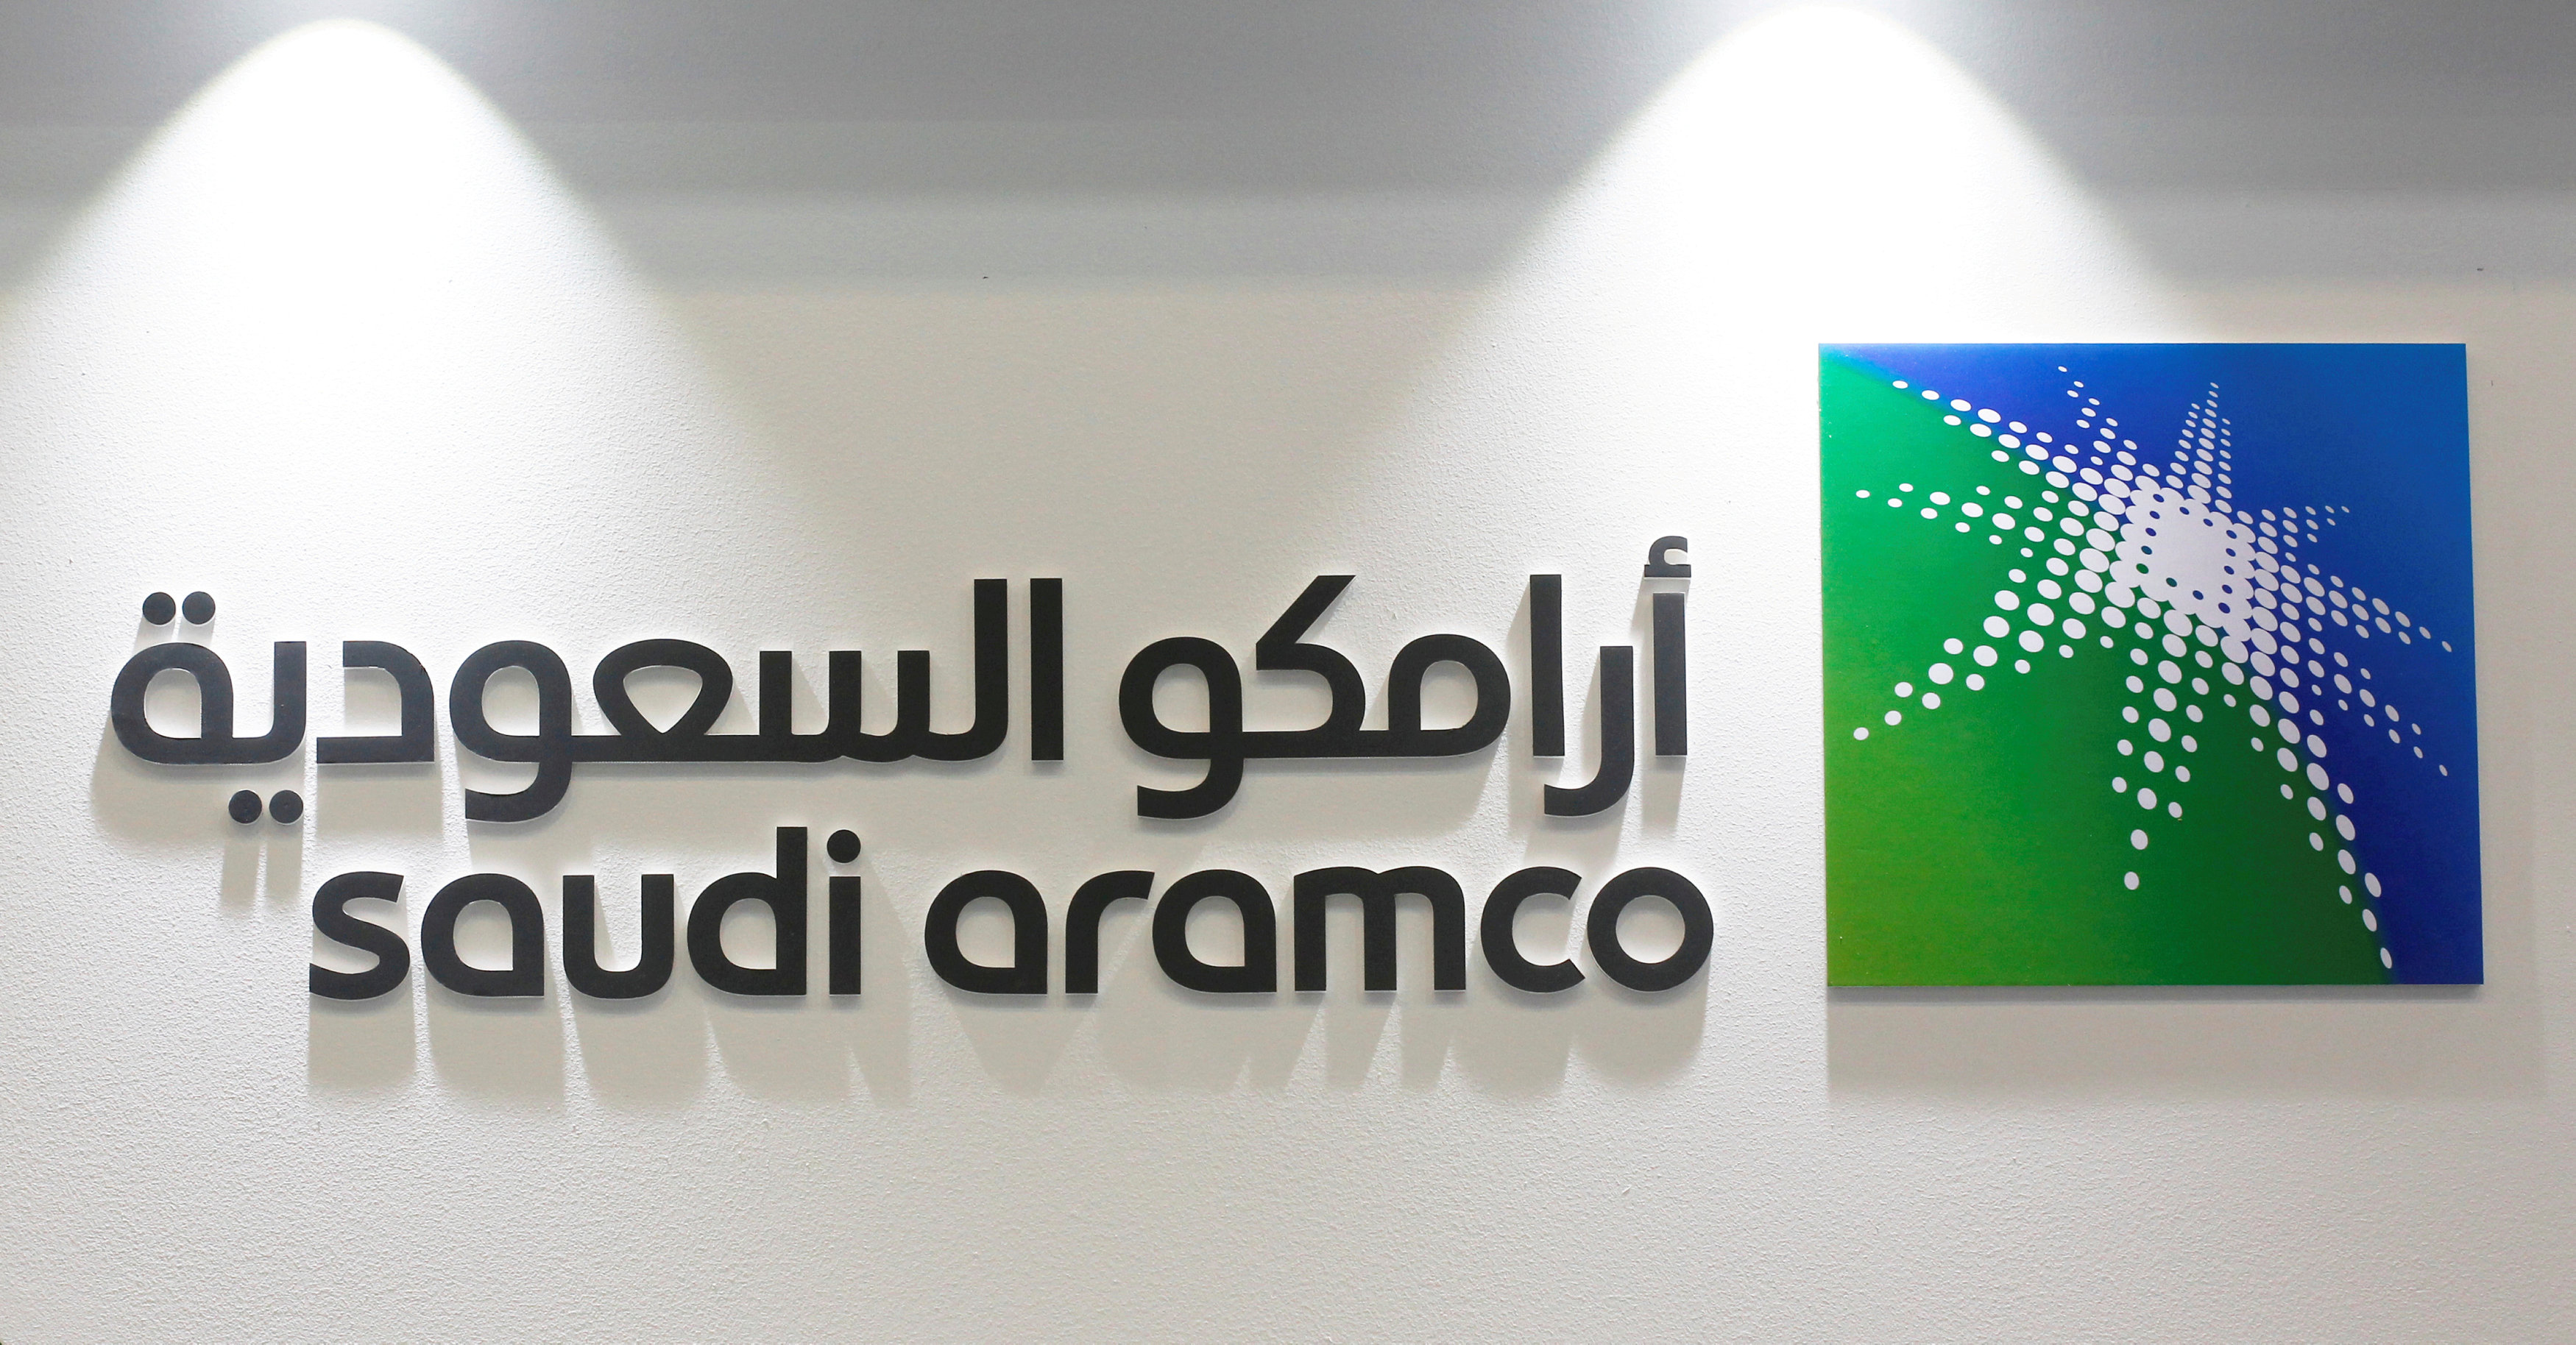 New oil-to-chemicals plant just the start: Aramco CEO